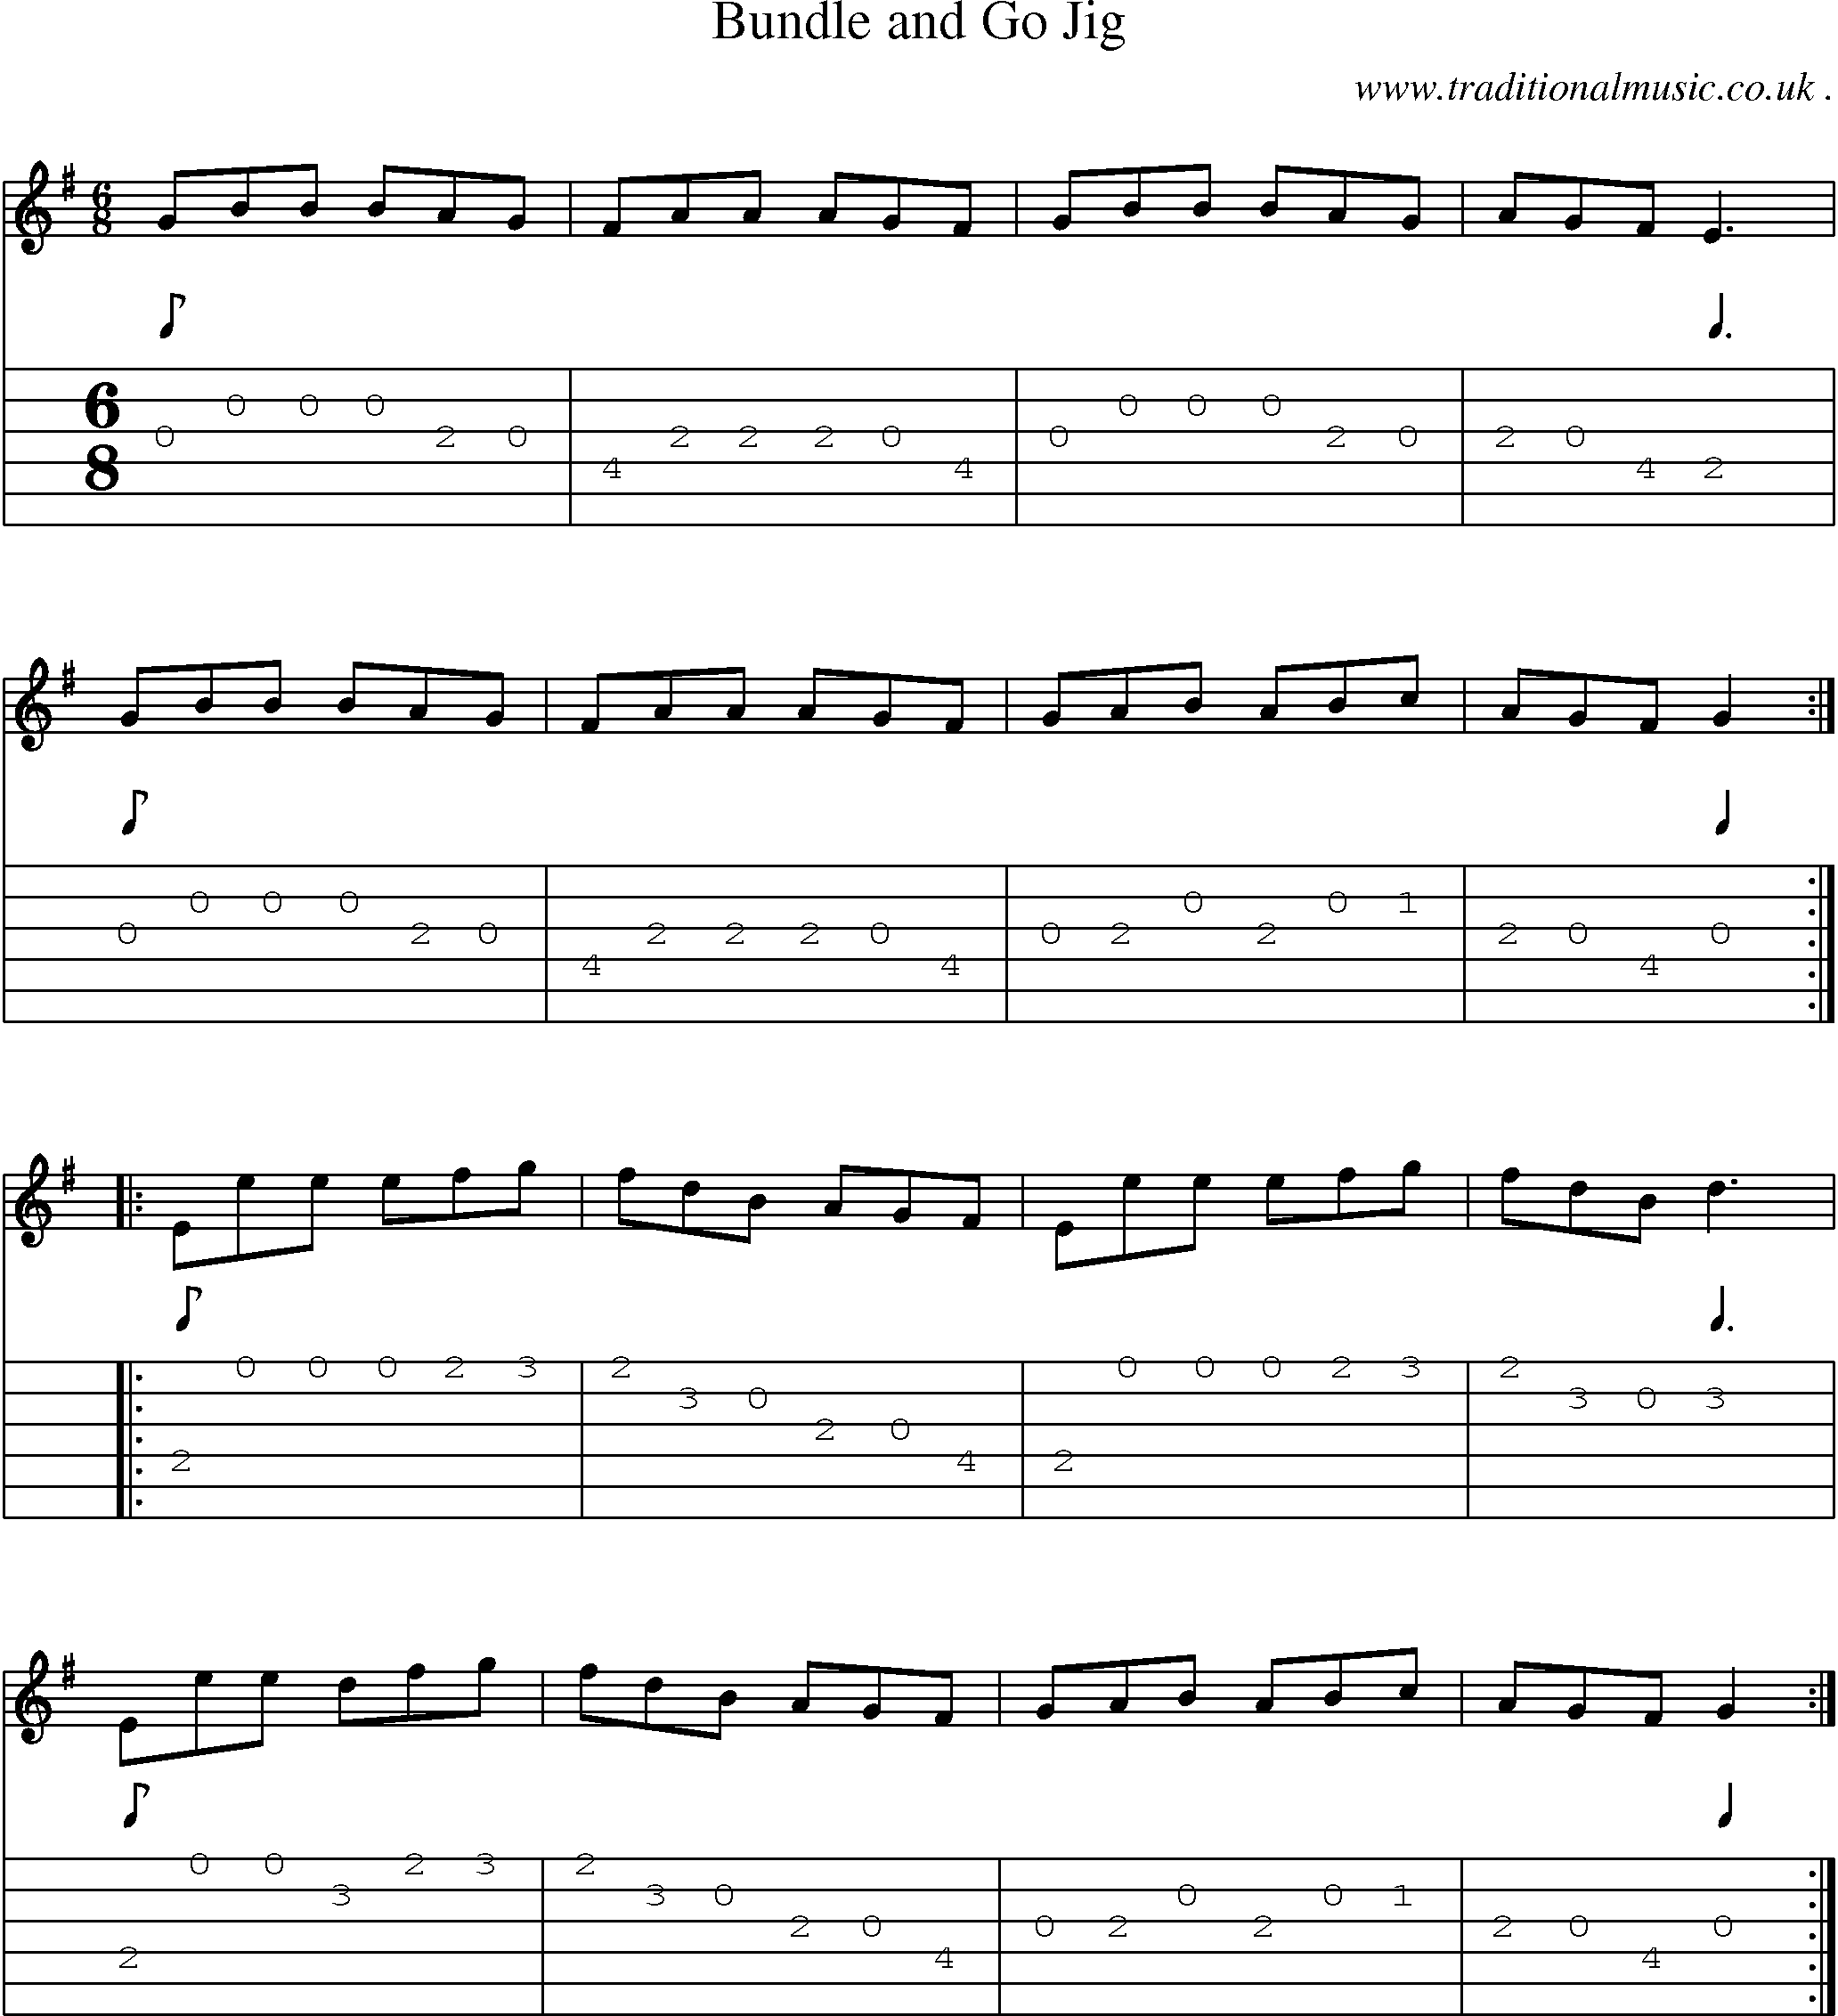 Sheet-Music and Guitar Tabs for Bundle And Go Jig